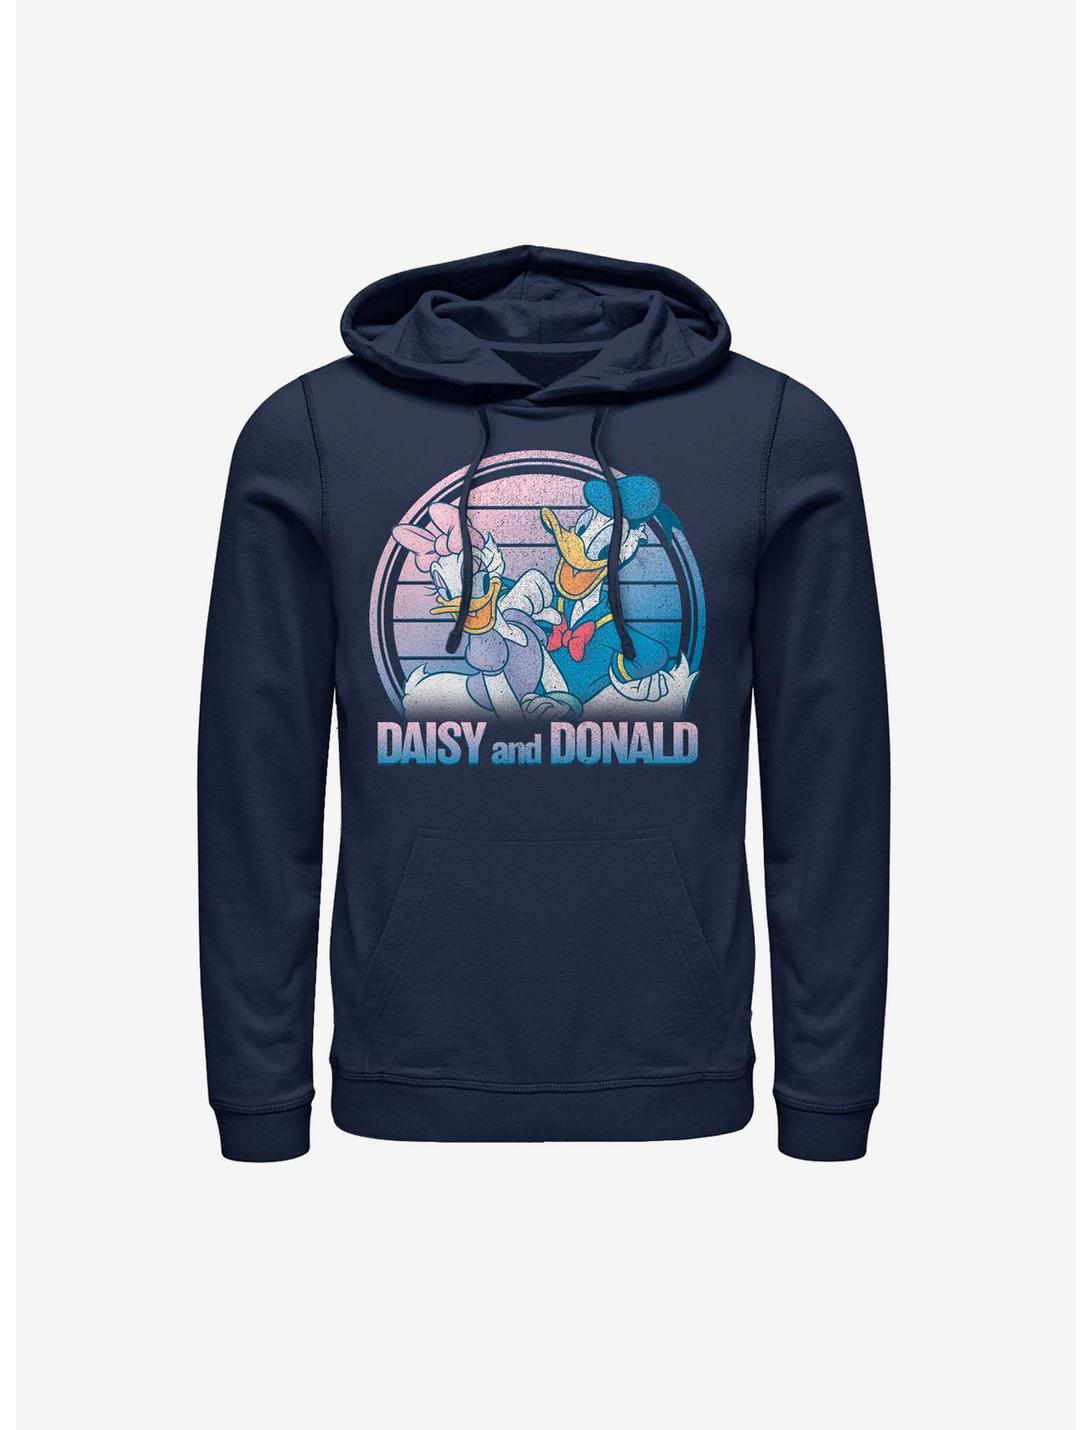 Disney Donald Duck Daisy And Donald Hoodie, NAVY, hi-res